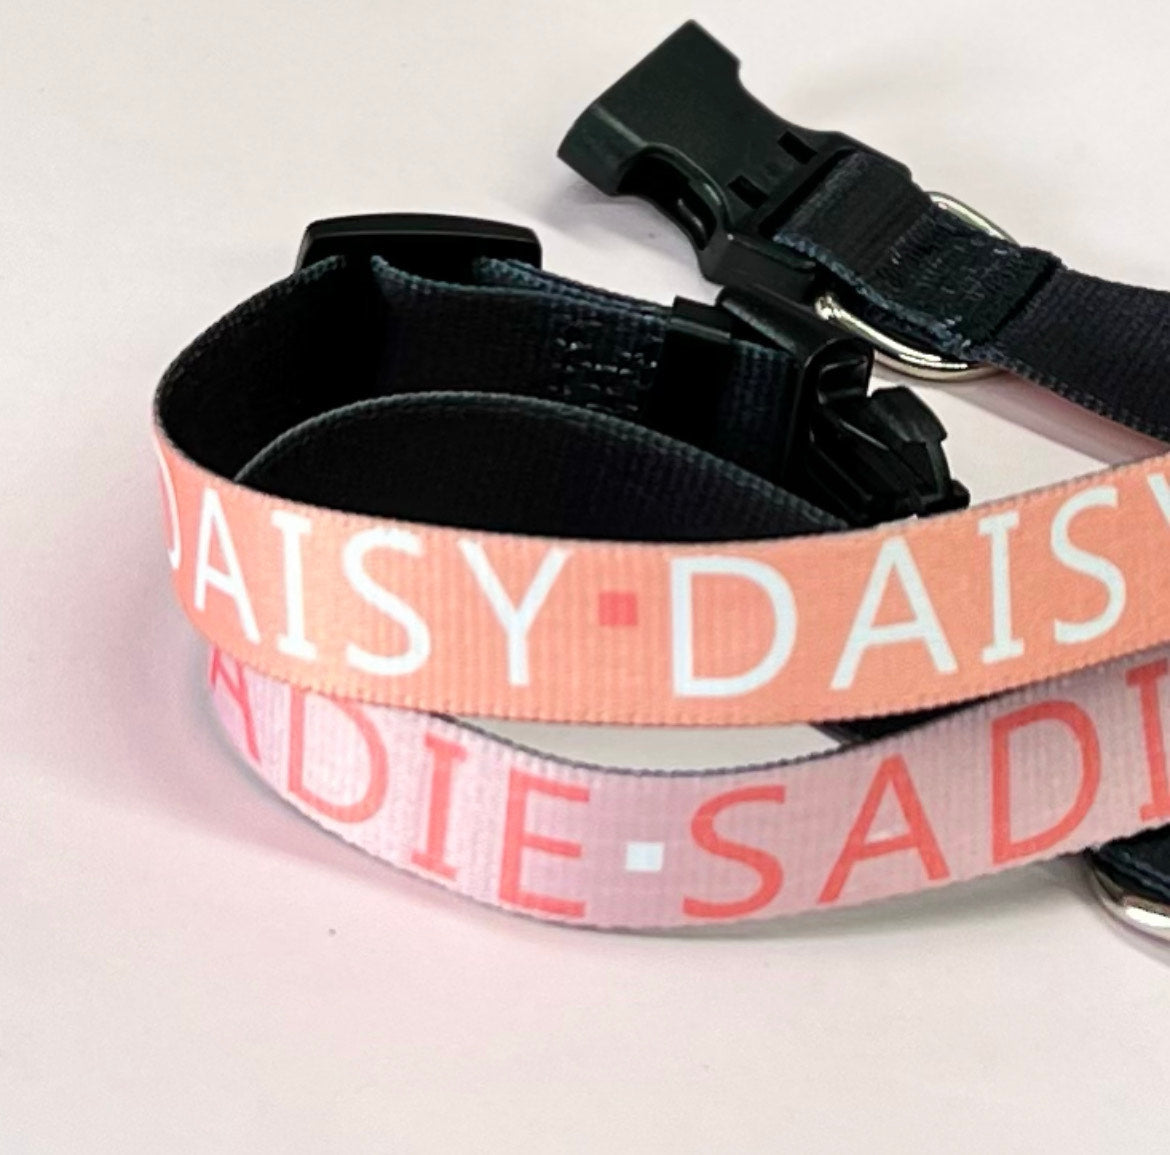 Personalised dog collar with pets name phone number. front photo of 2 collars